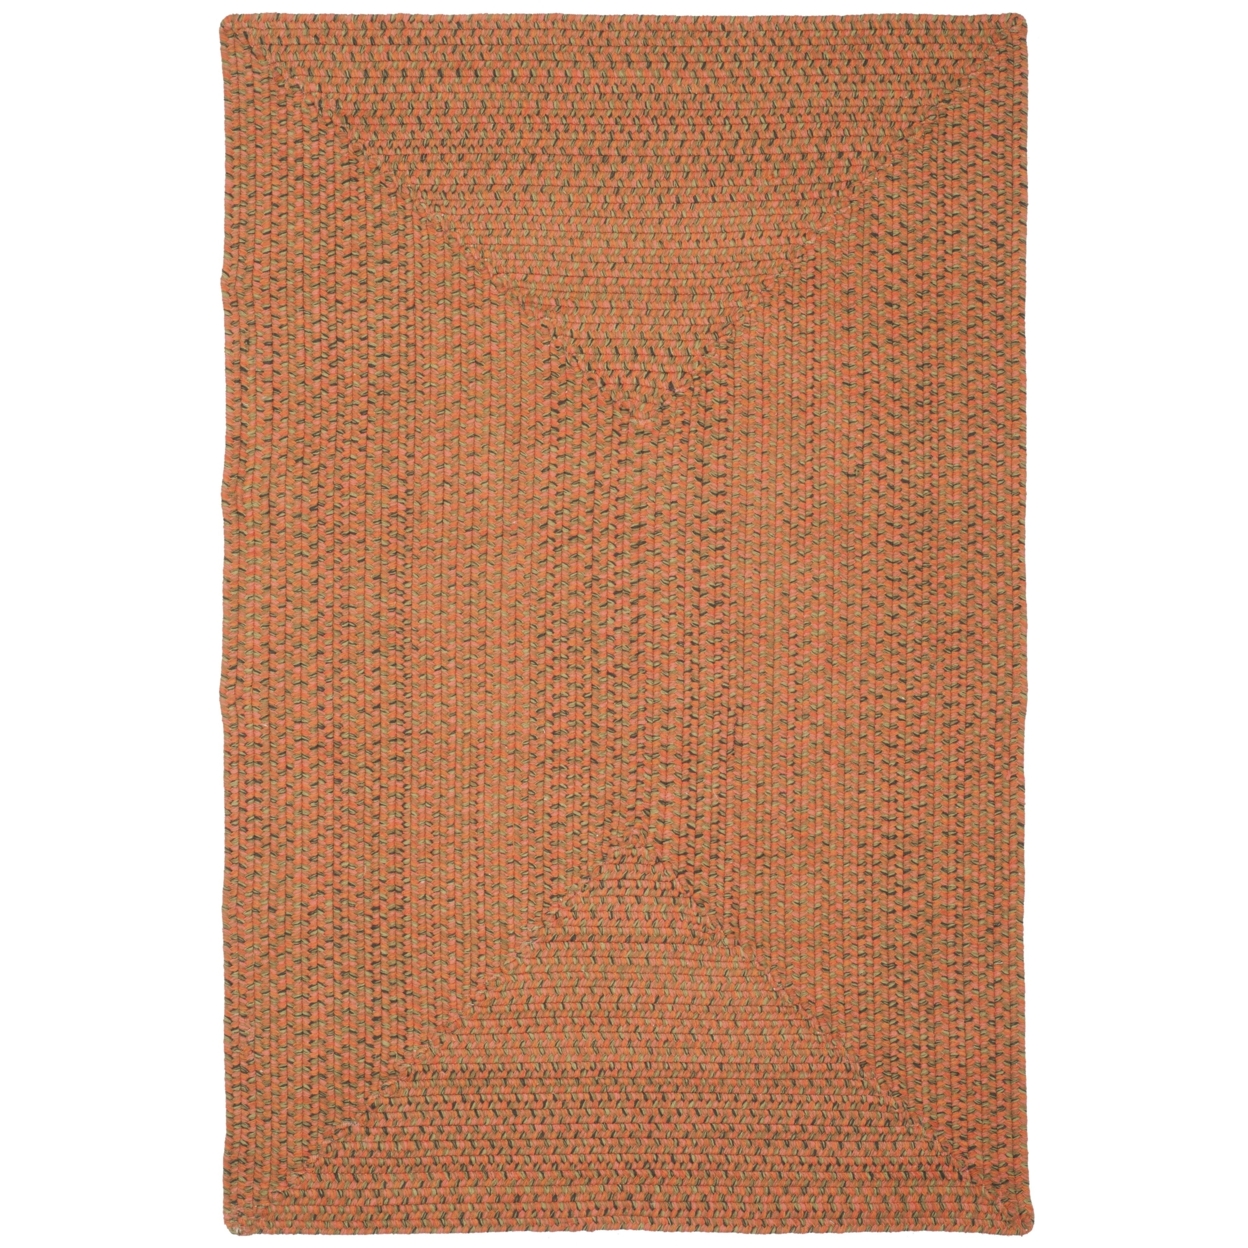 SAFAVIEH Braided Collection BRD166A Handwoven Multi Rug - 4' X 6'